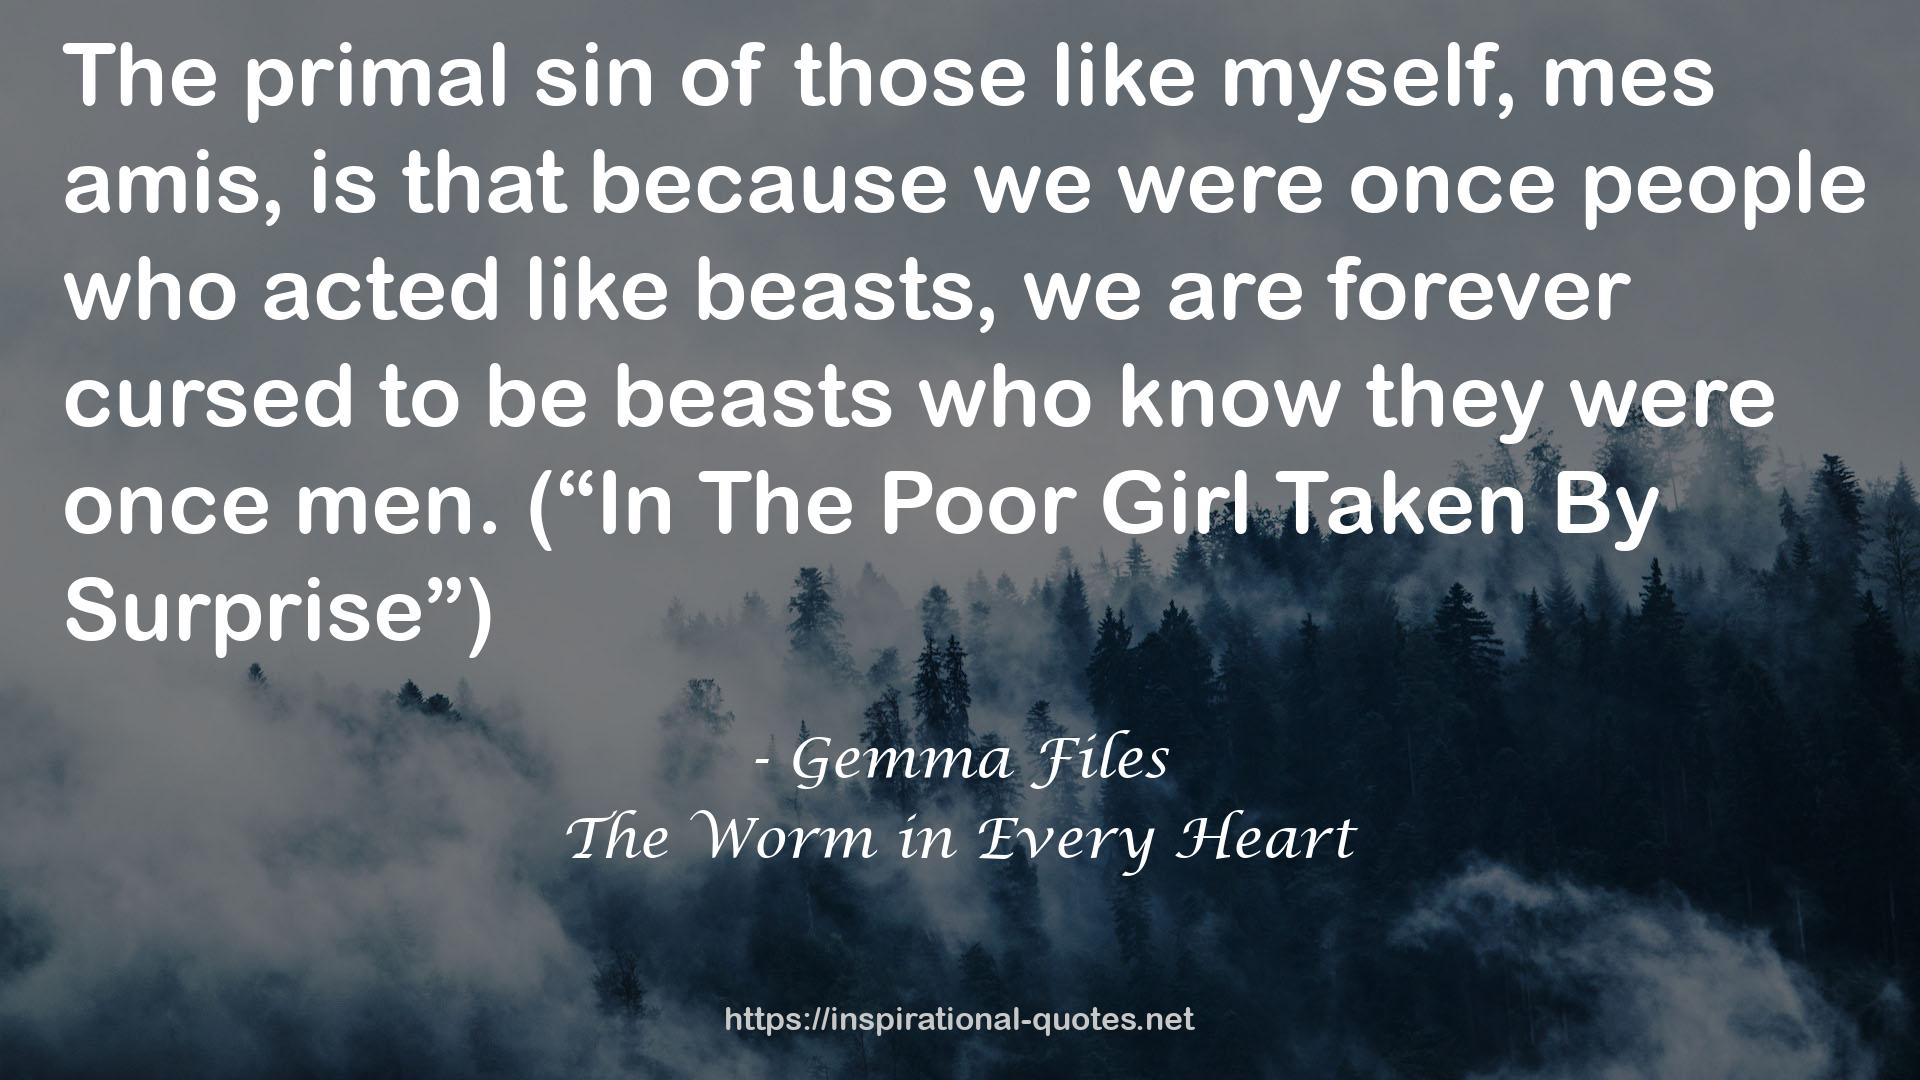 The Worm in Every Heart QUOTES